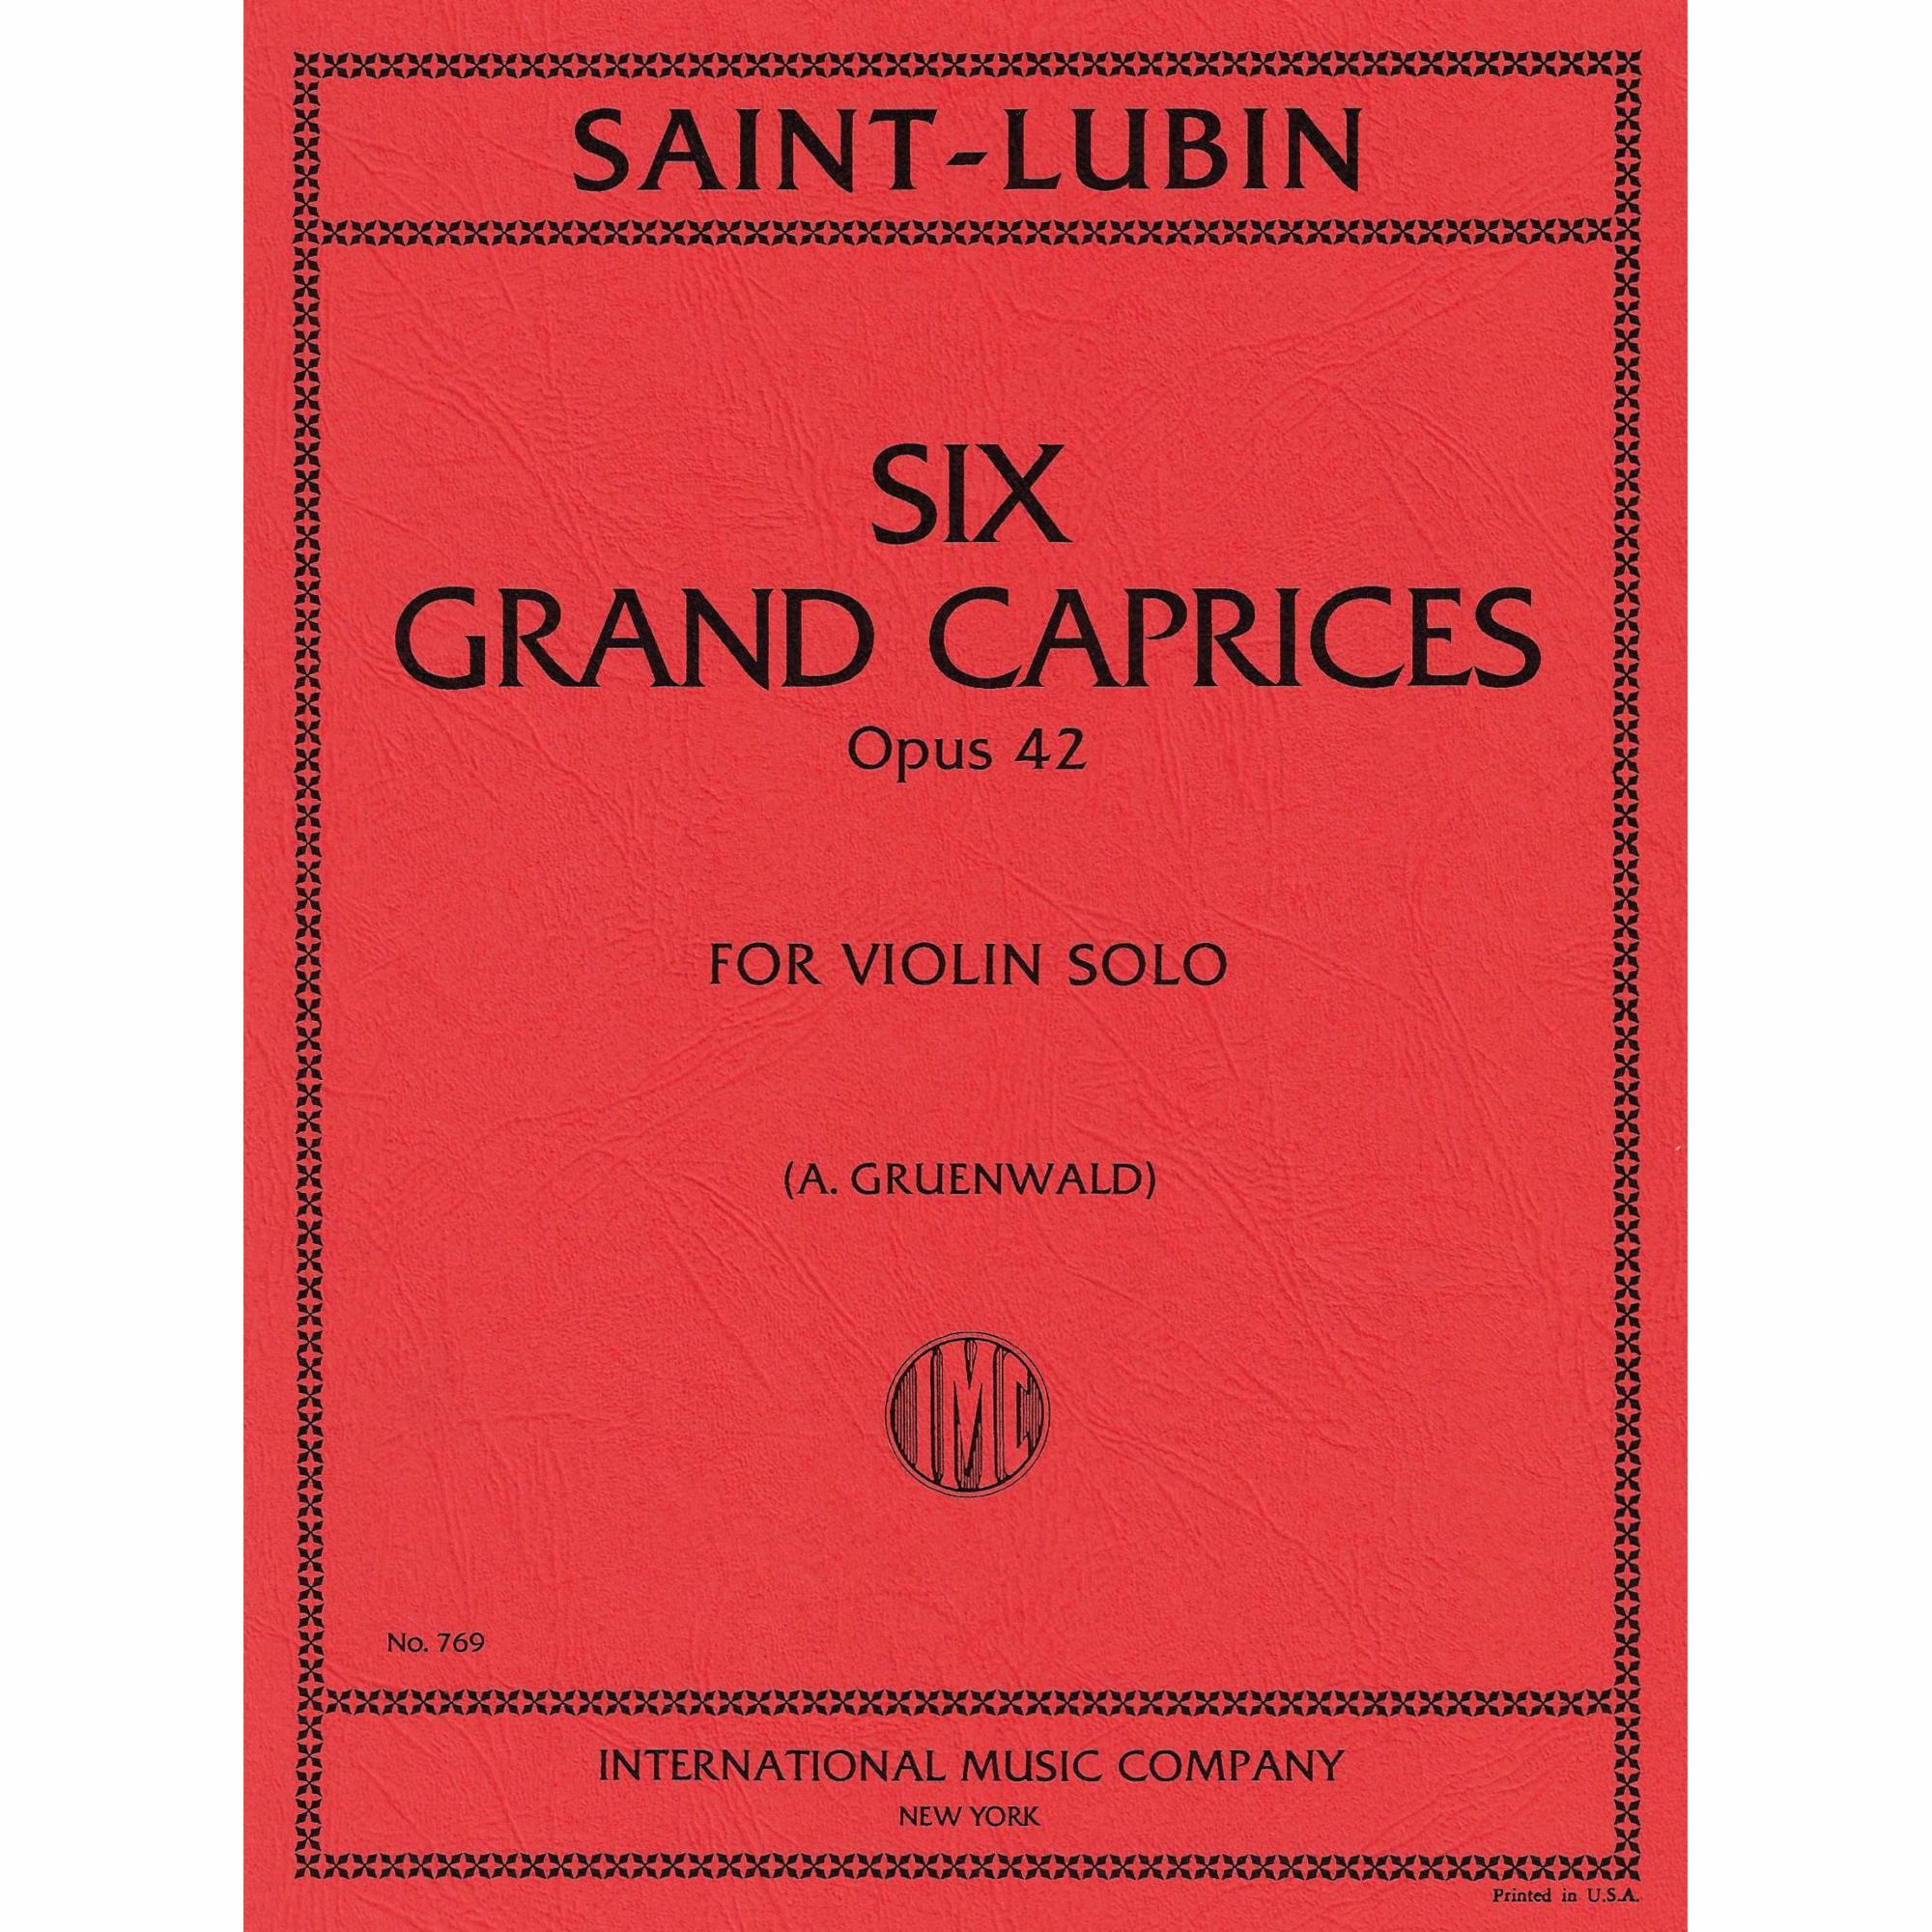 Saint-Lubin -- Six Grand Caprices, Op. 42 for Violin